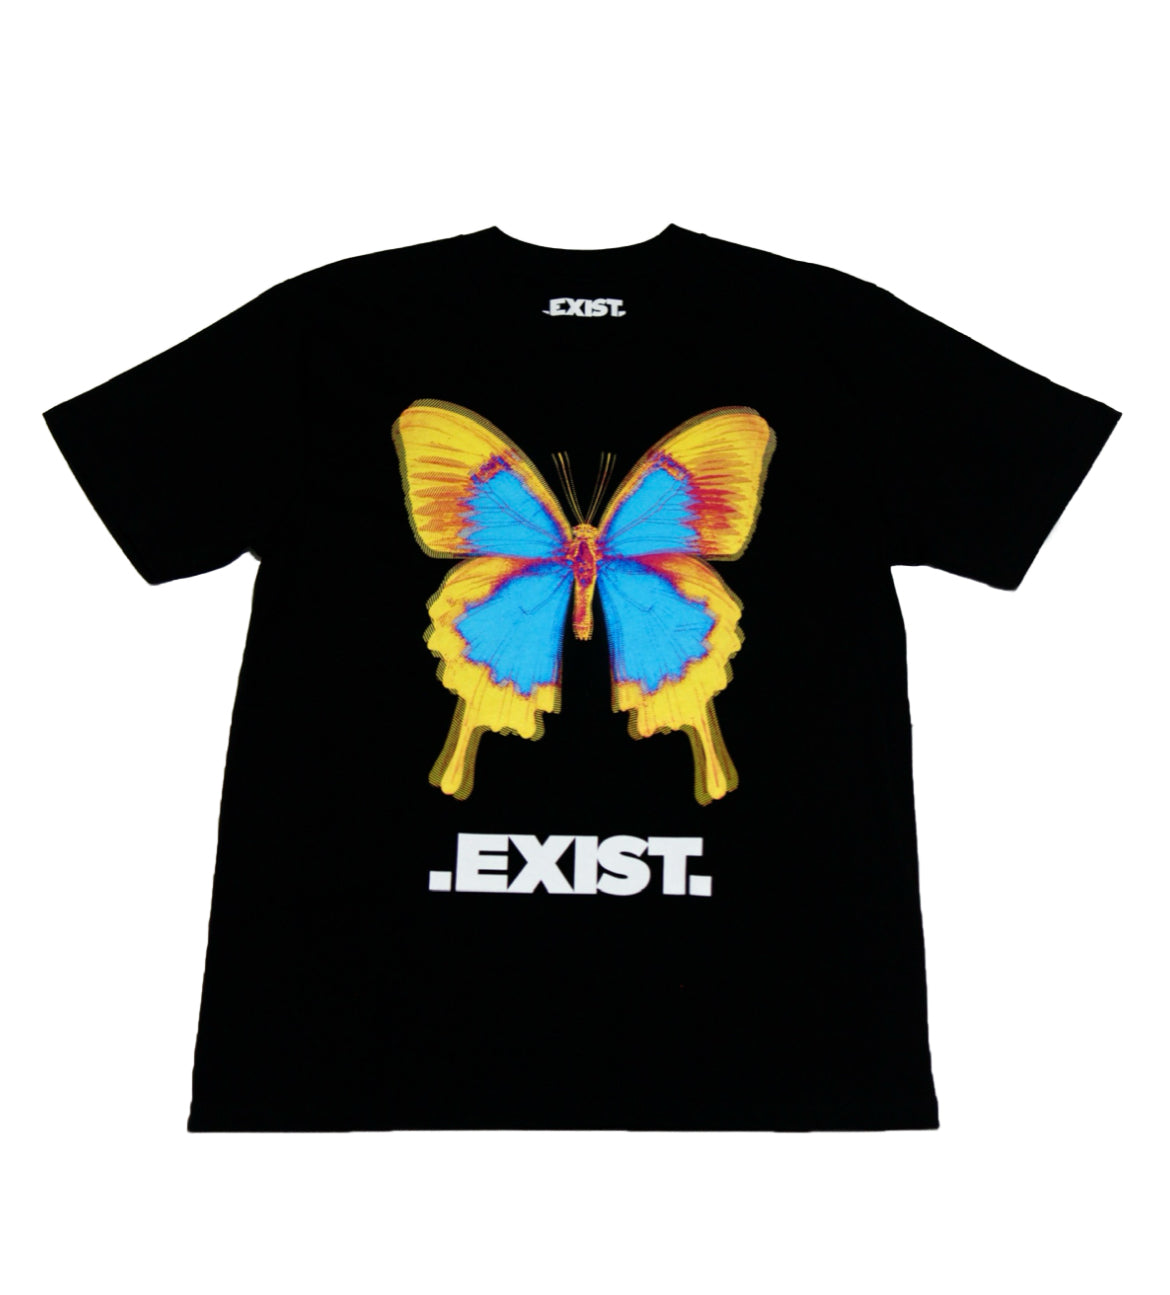 .EXIST. Butterfly